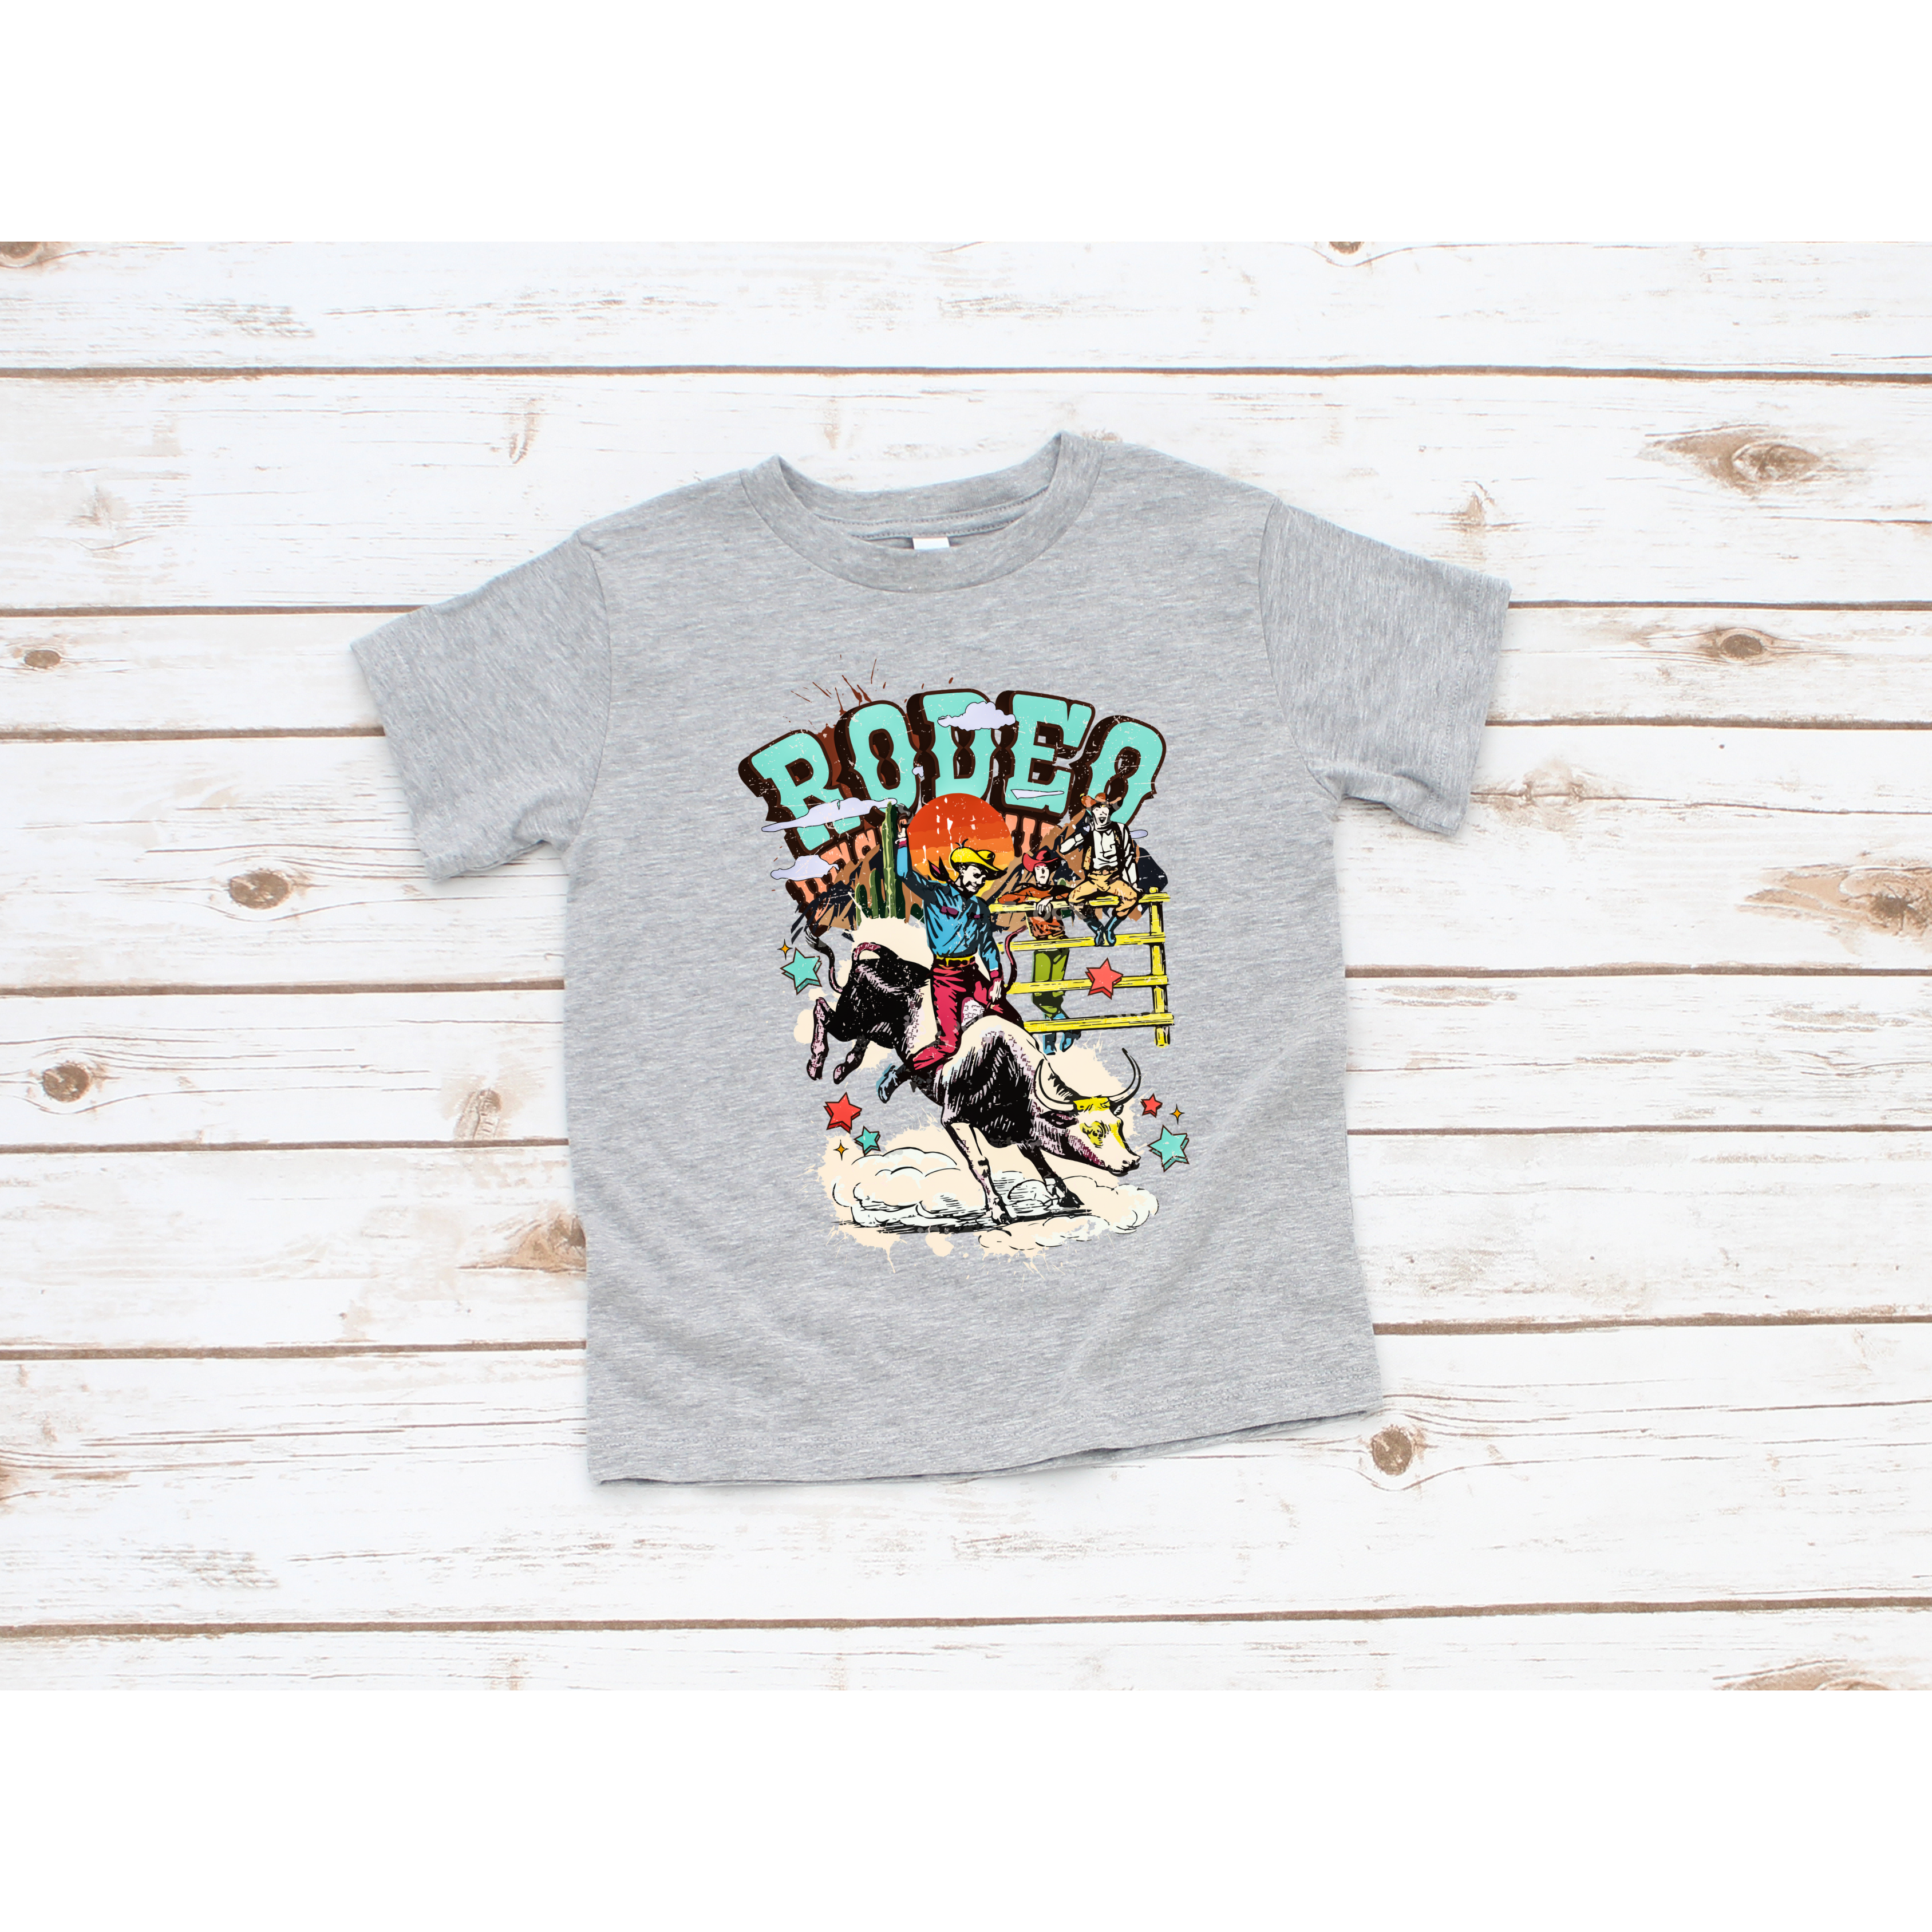 Rodeo Graphic Tee (Black or Gray)